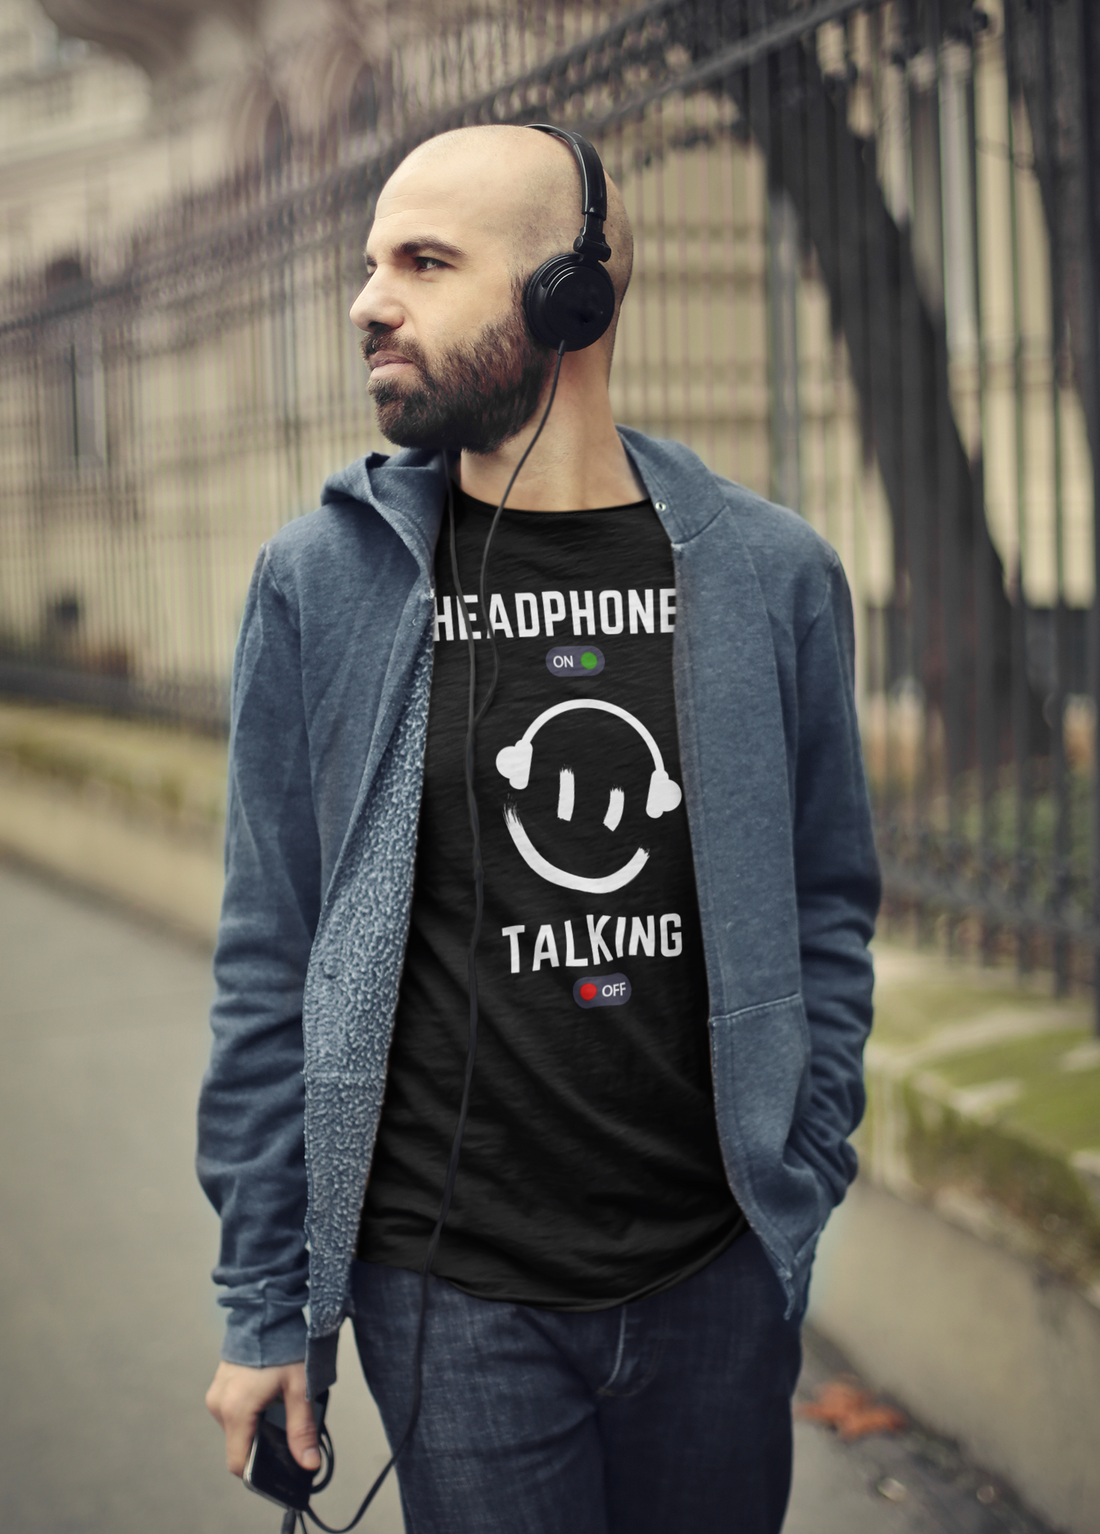 A music tshirt design with the text "headphones one talking off". A comical tshirt for introverts